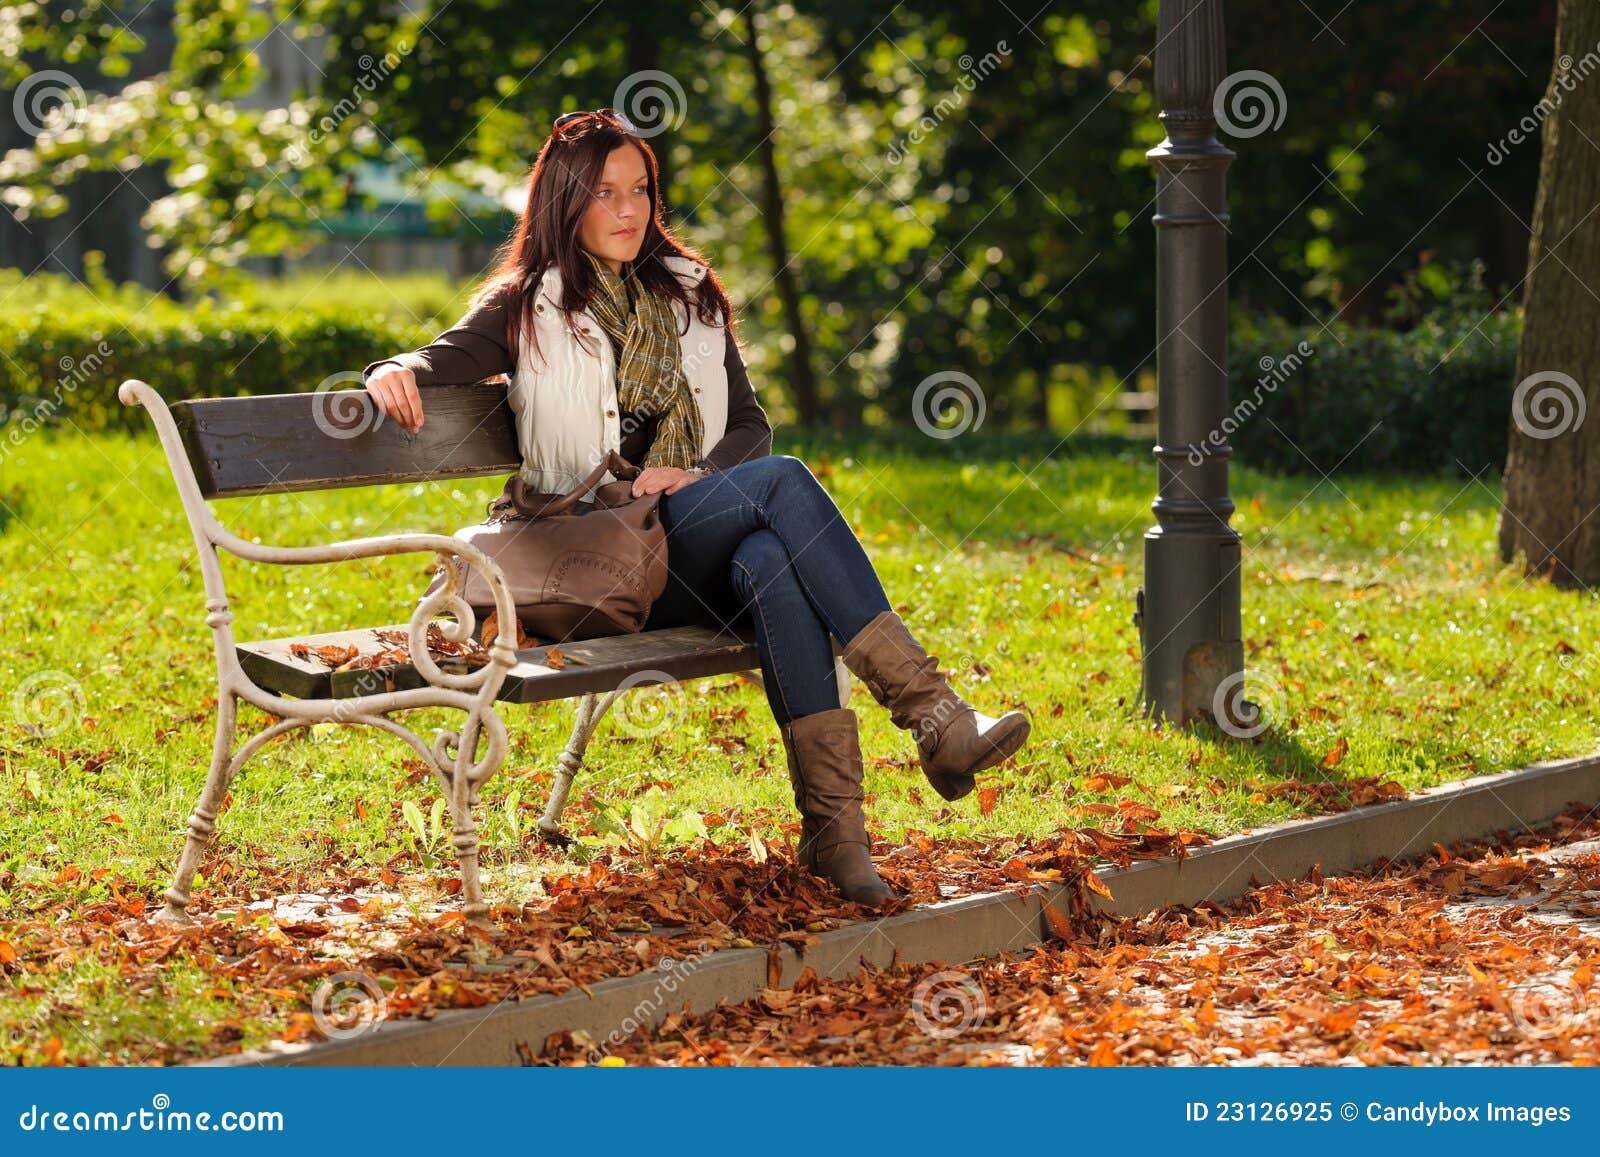 Autumn fashion outfit attractive woman sitting on park bench sunset.